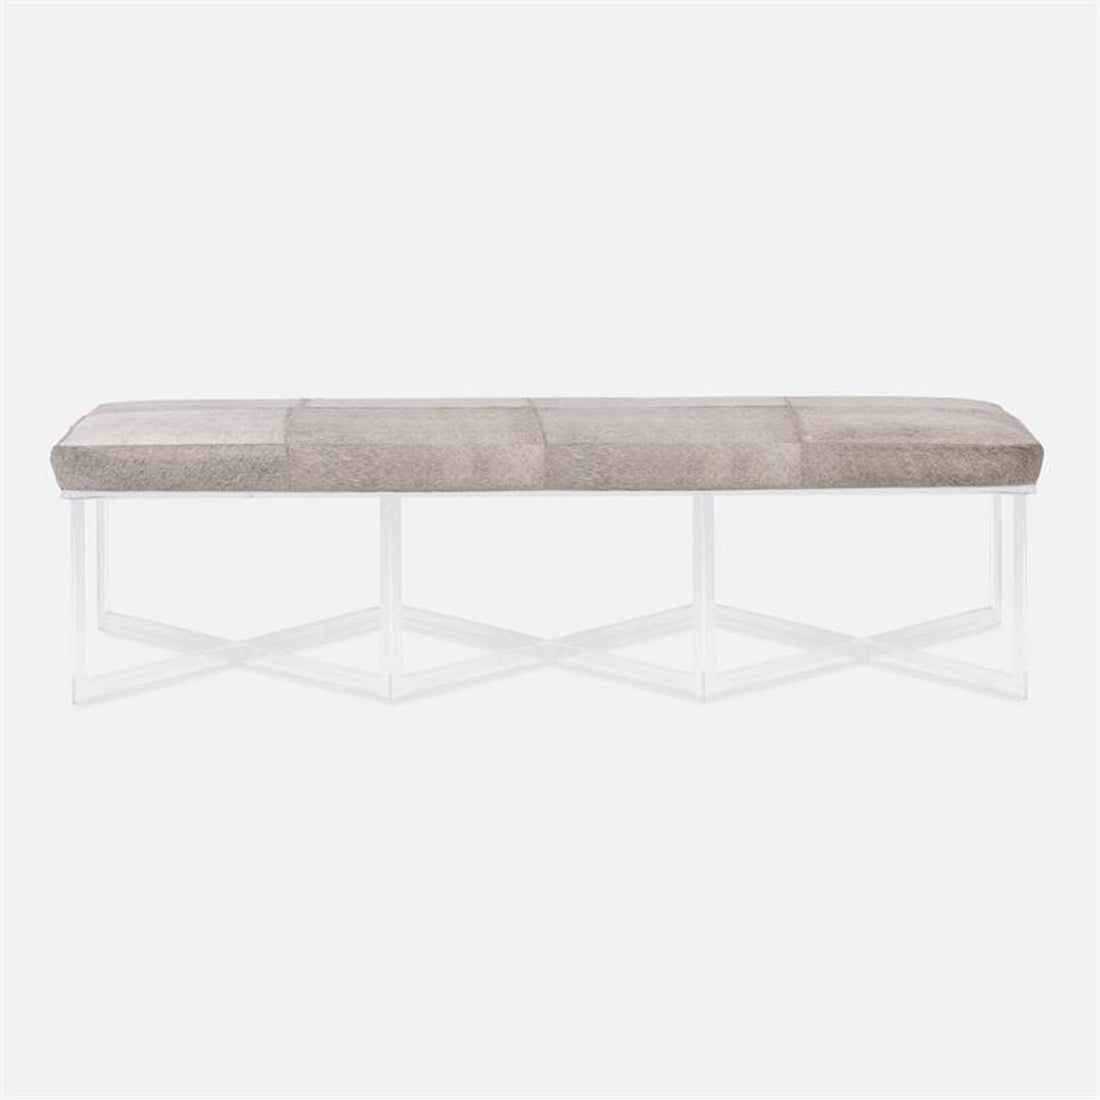 Made Goods Lex Clear Acrylic Triple Bench in Bassac Shagreen Leather